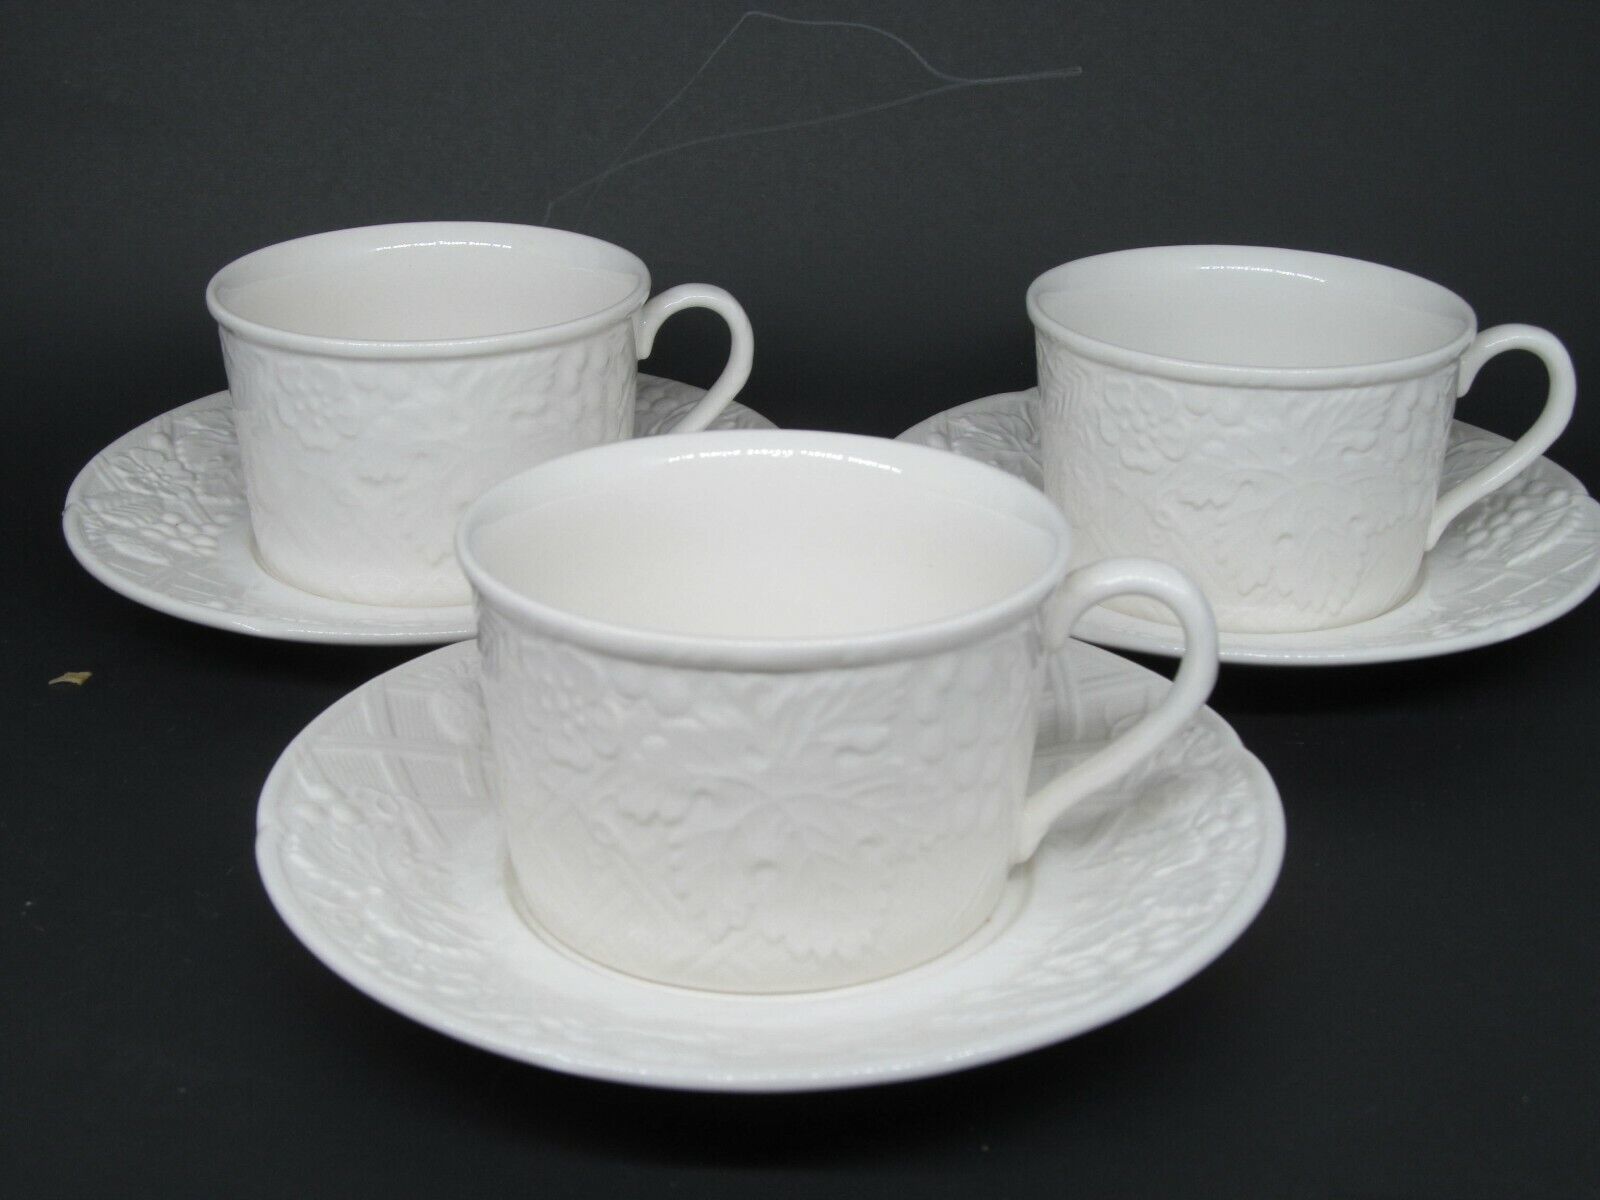 Primary image for Mikasa English countryside Cups & Saucers bundle of 3 sets